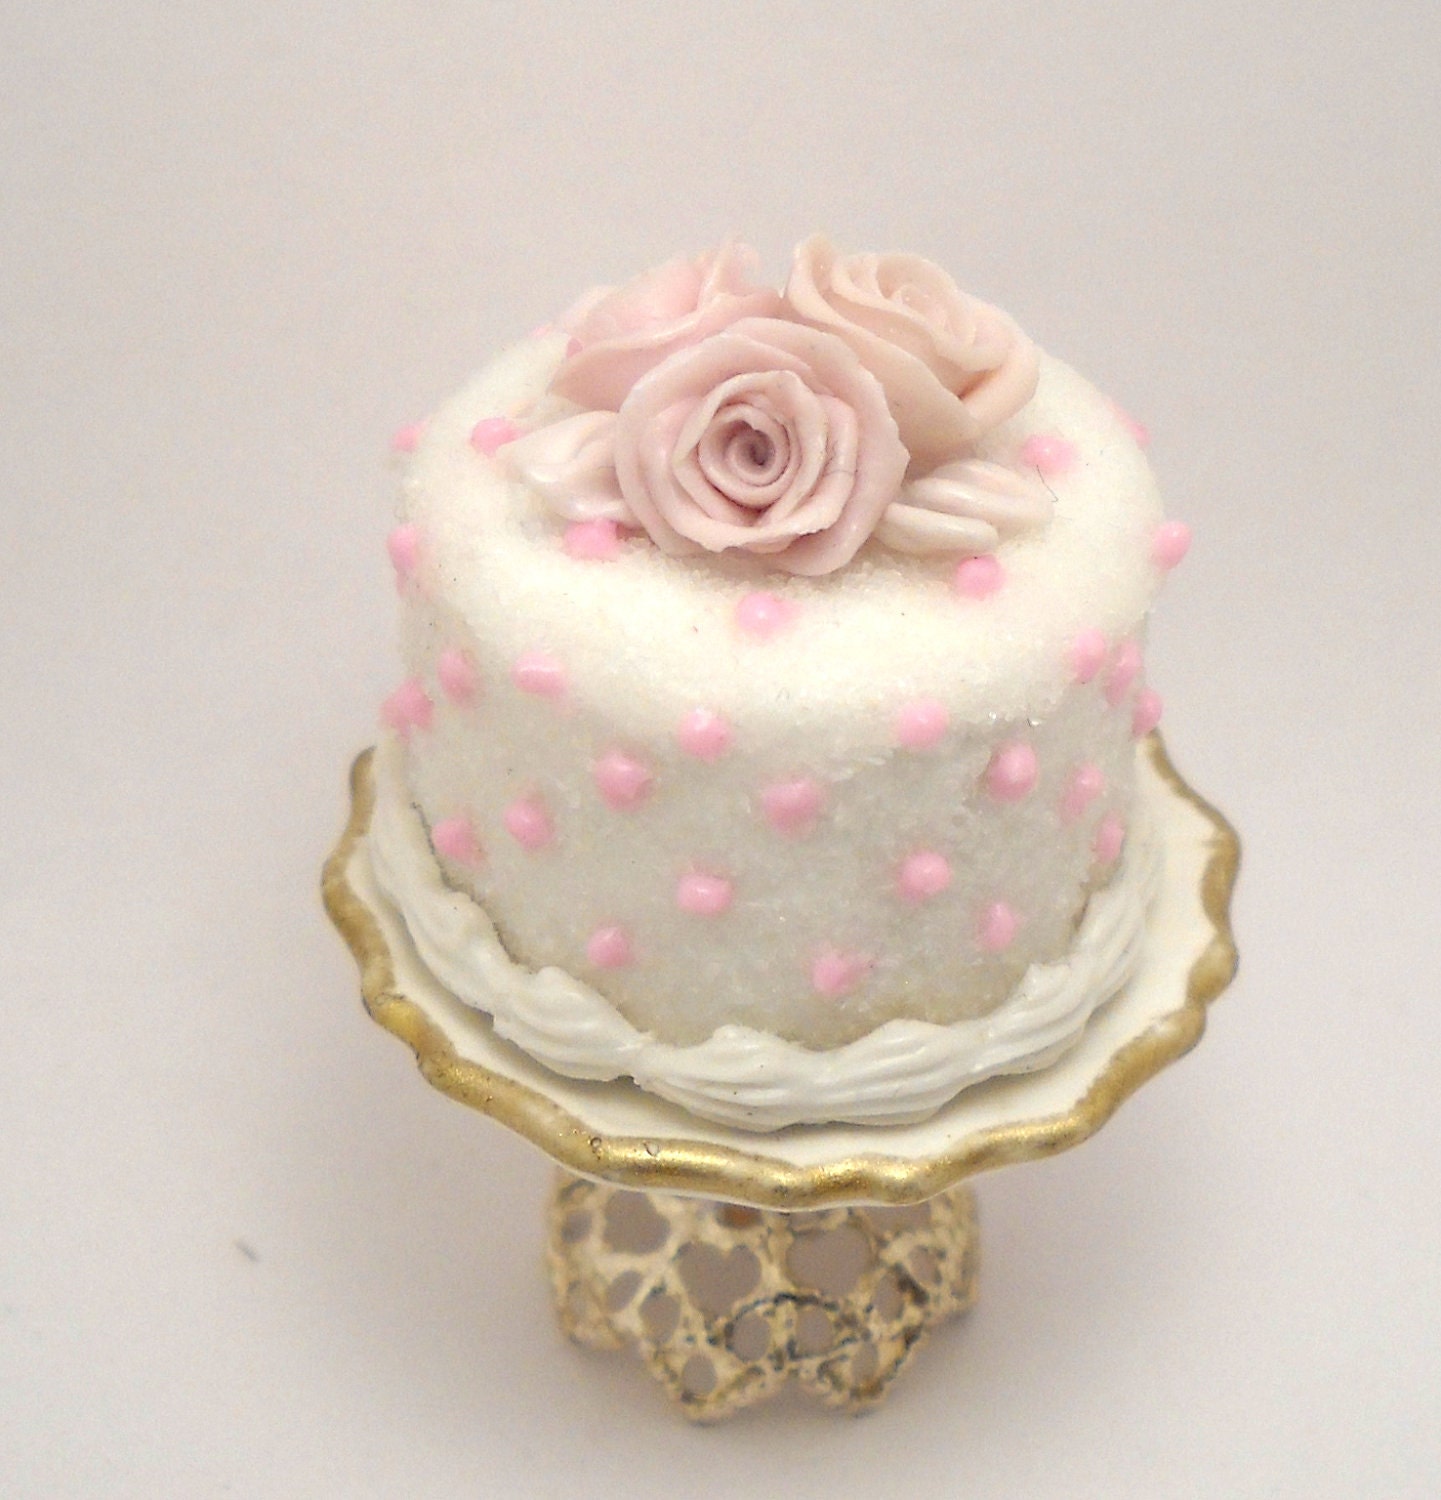 1/12TH scale - romantic cake with pink roses by Lory